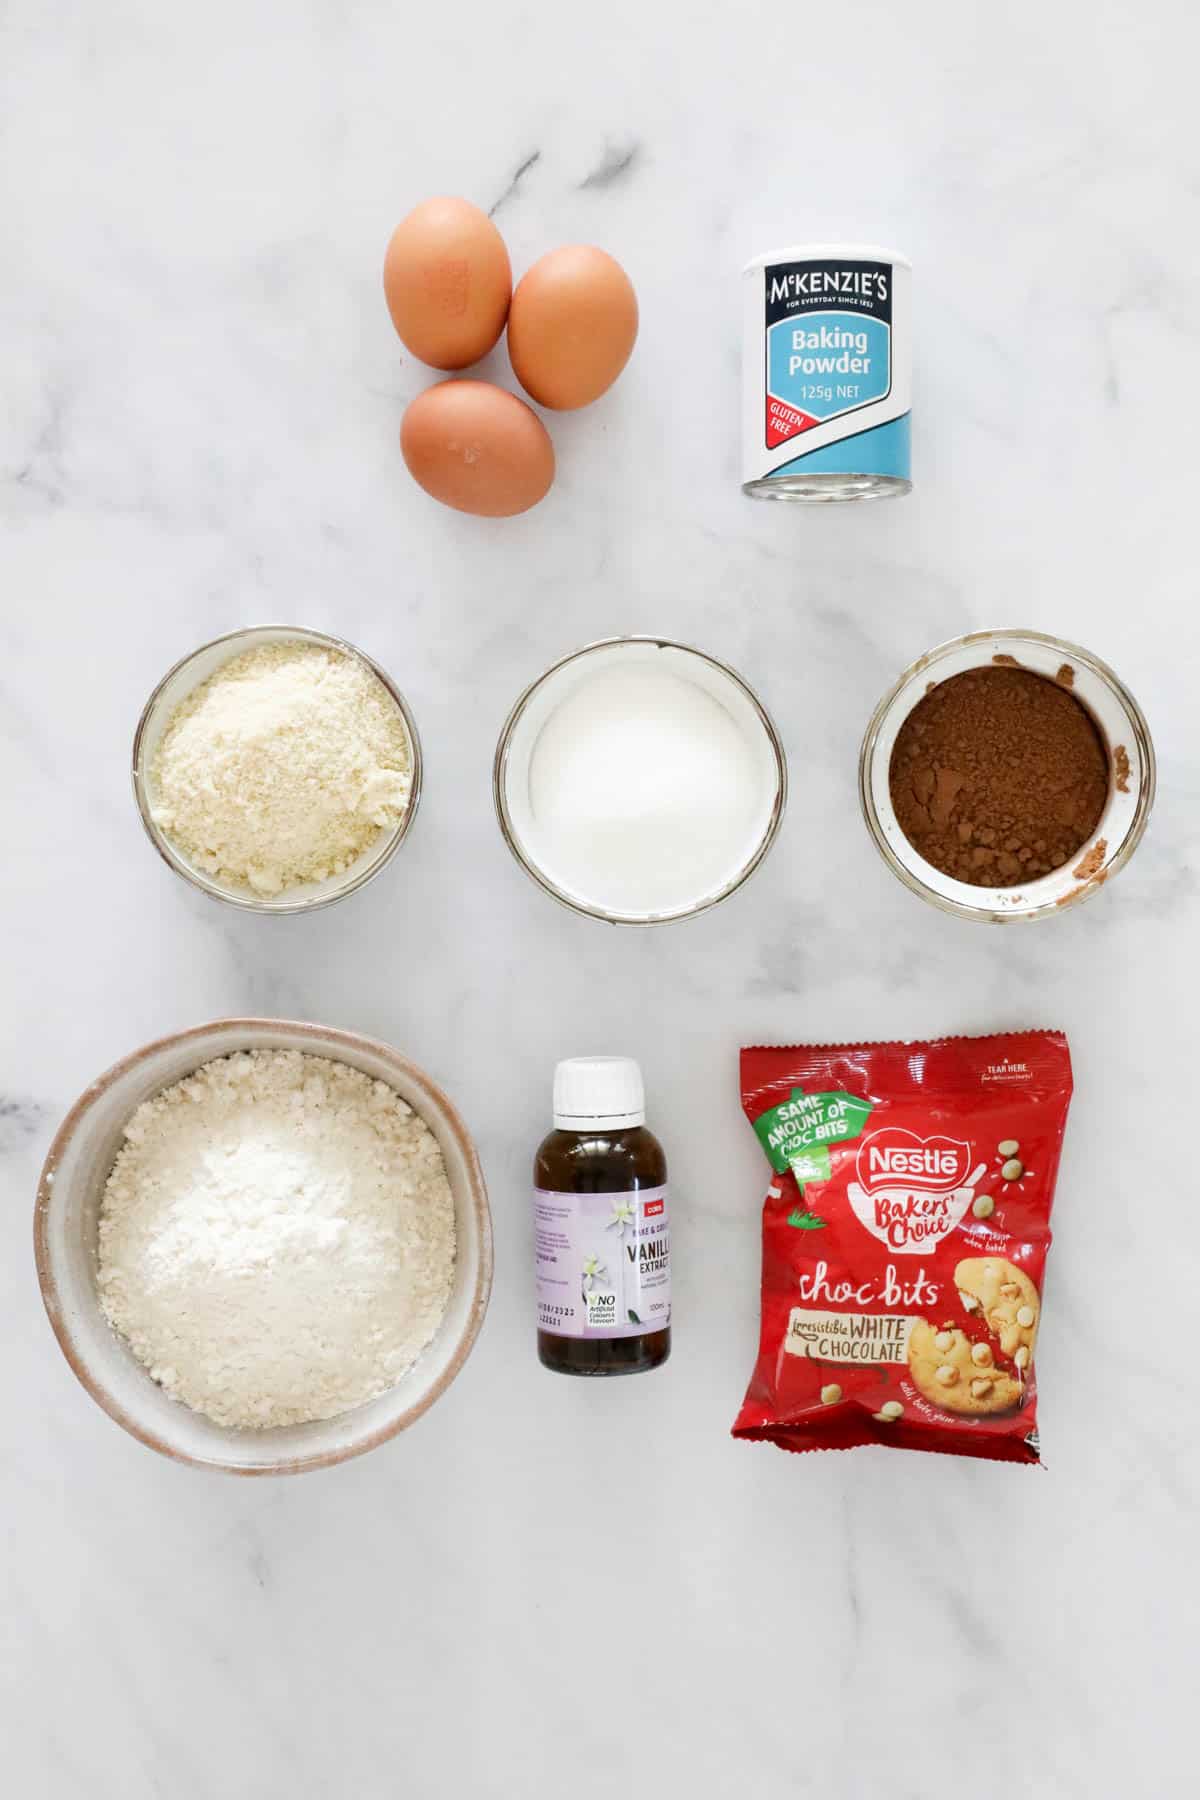 The ingredients for chocolate chip biscotti.